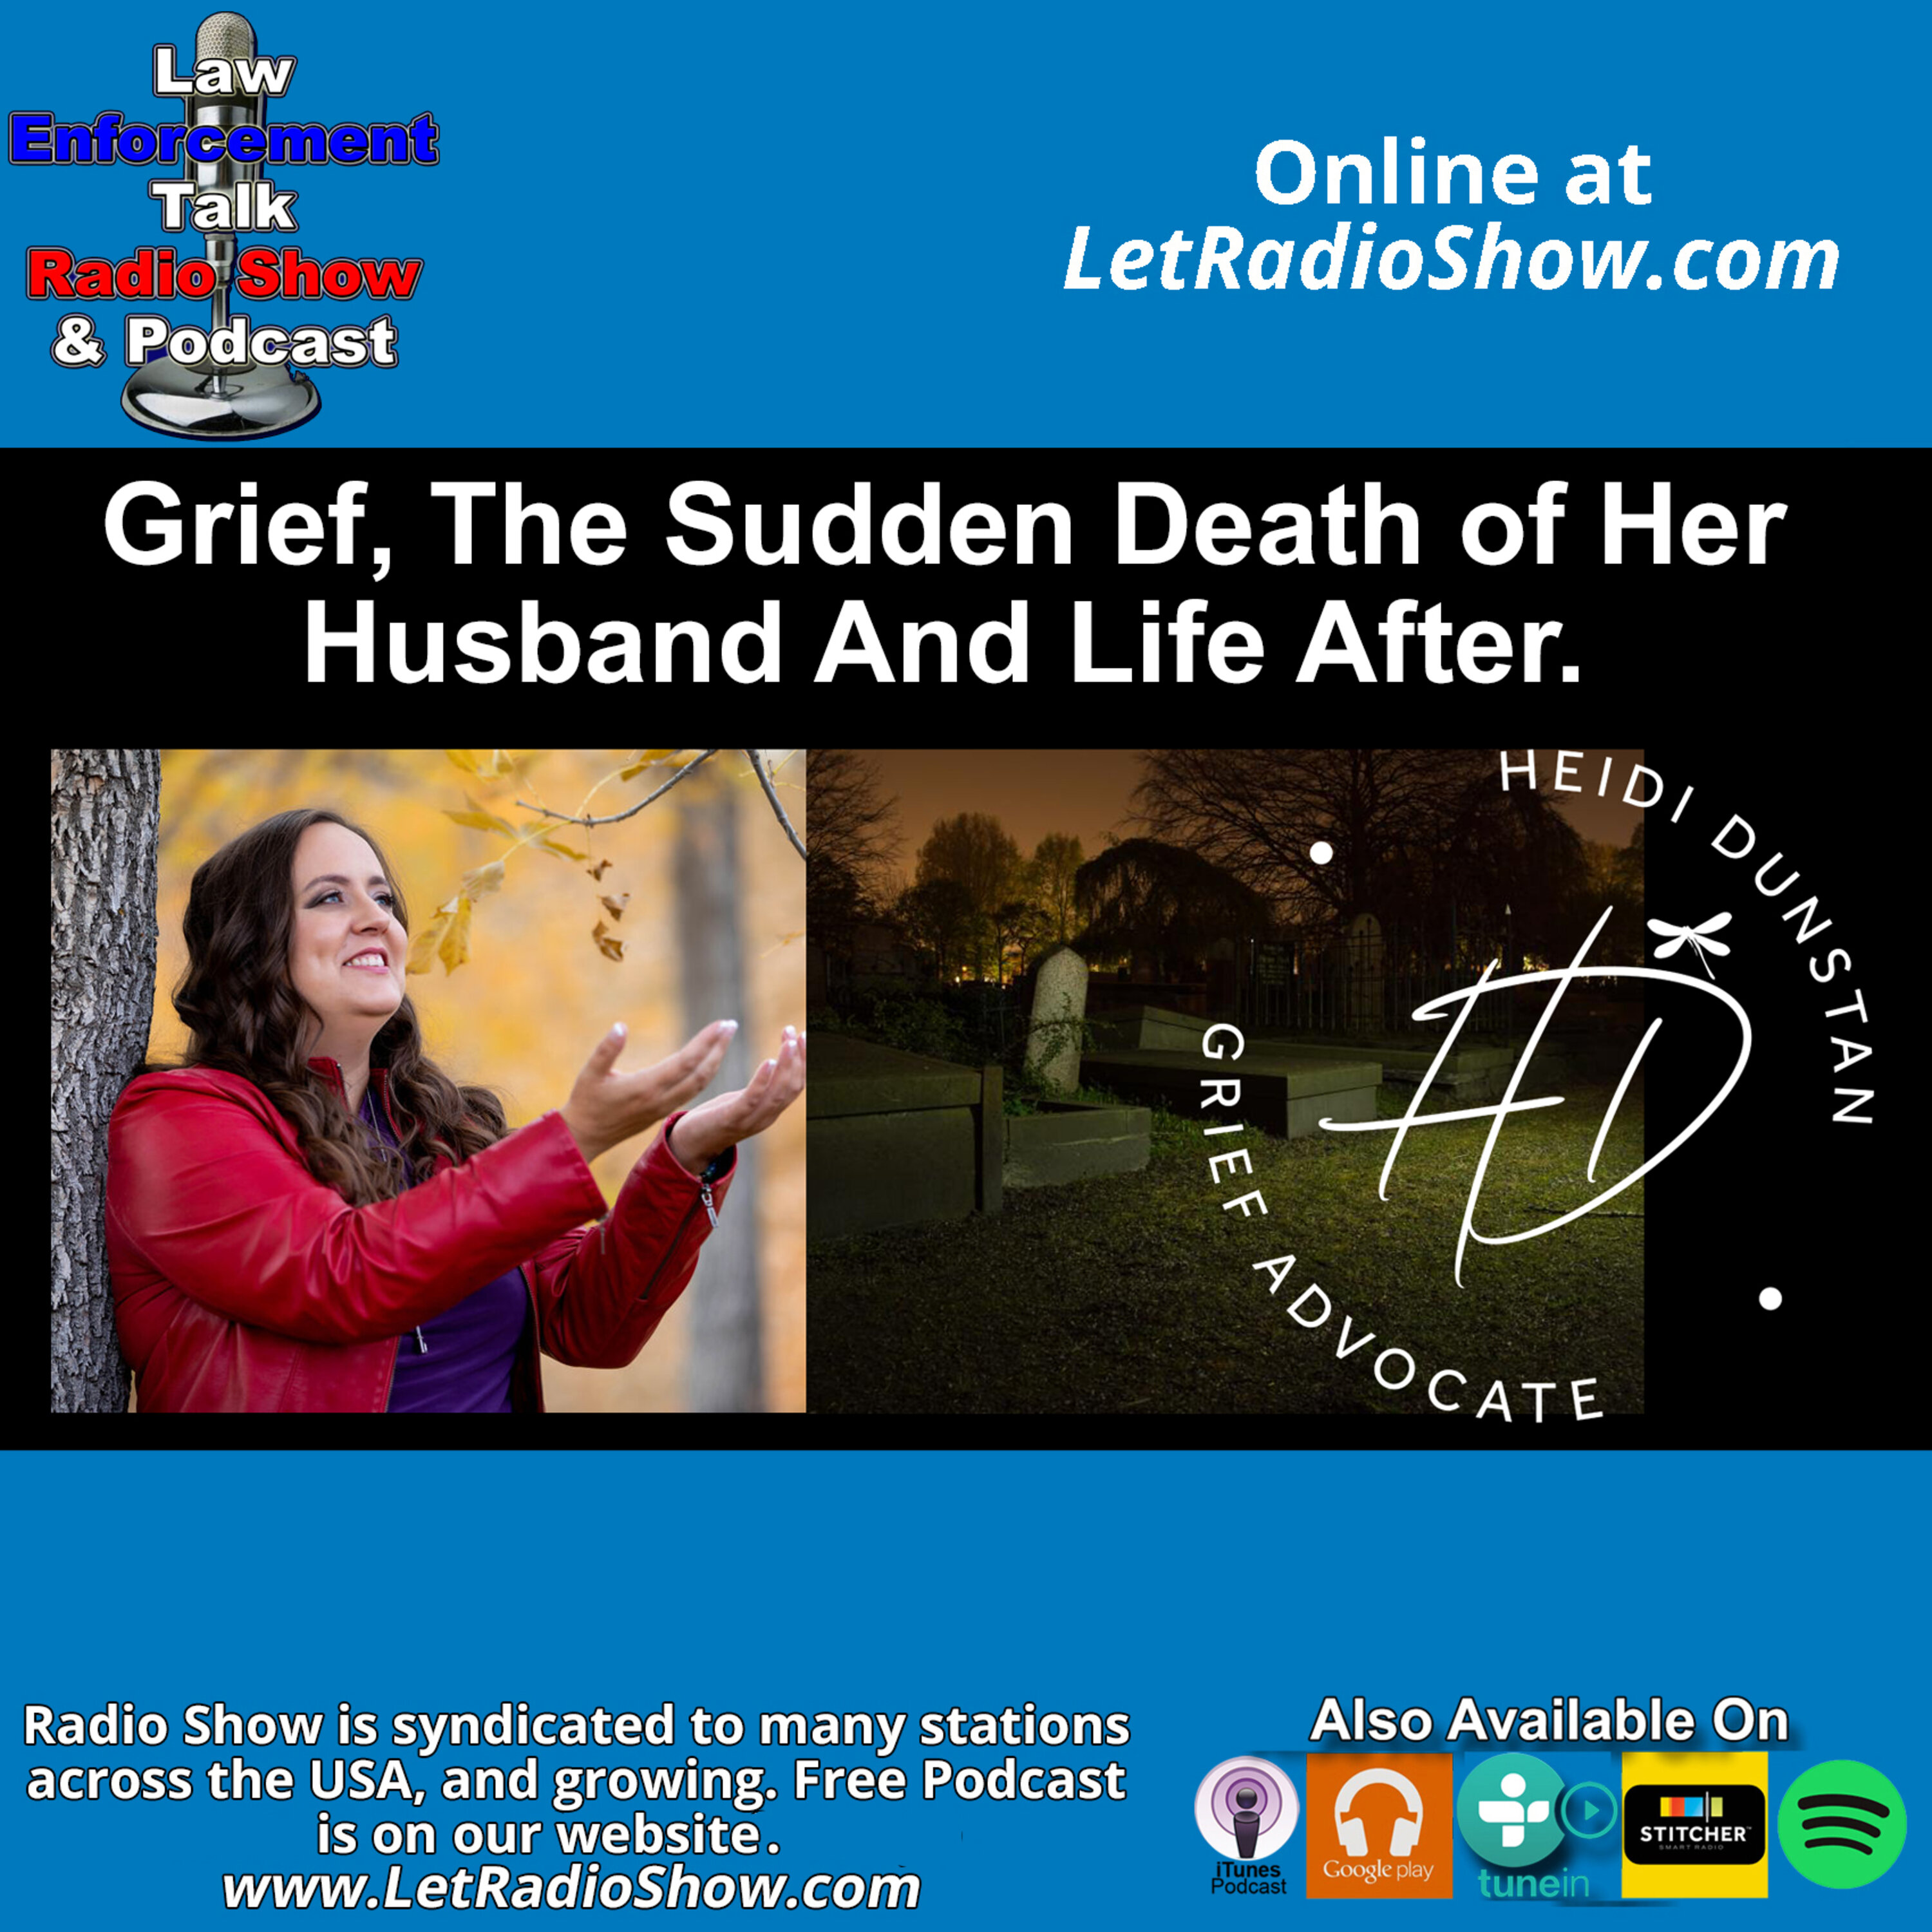 Grief After The Sudden Death Of Her Husband a Retired Firefighter.